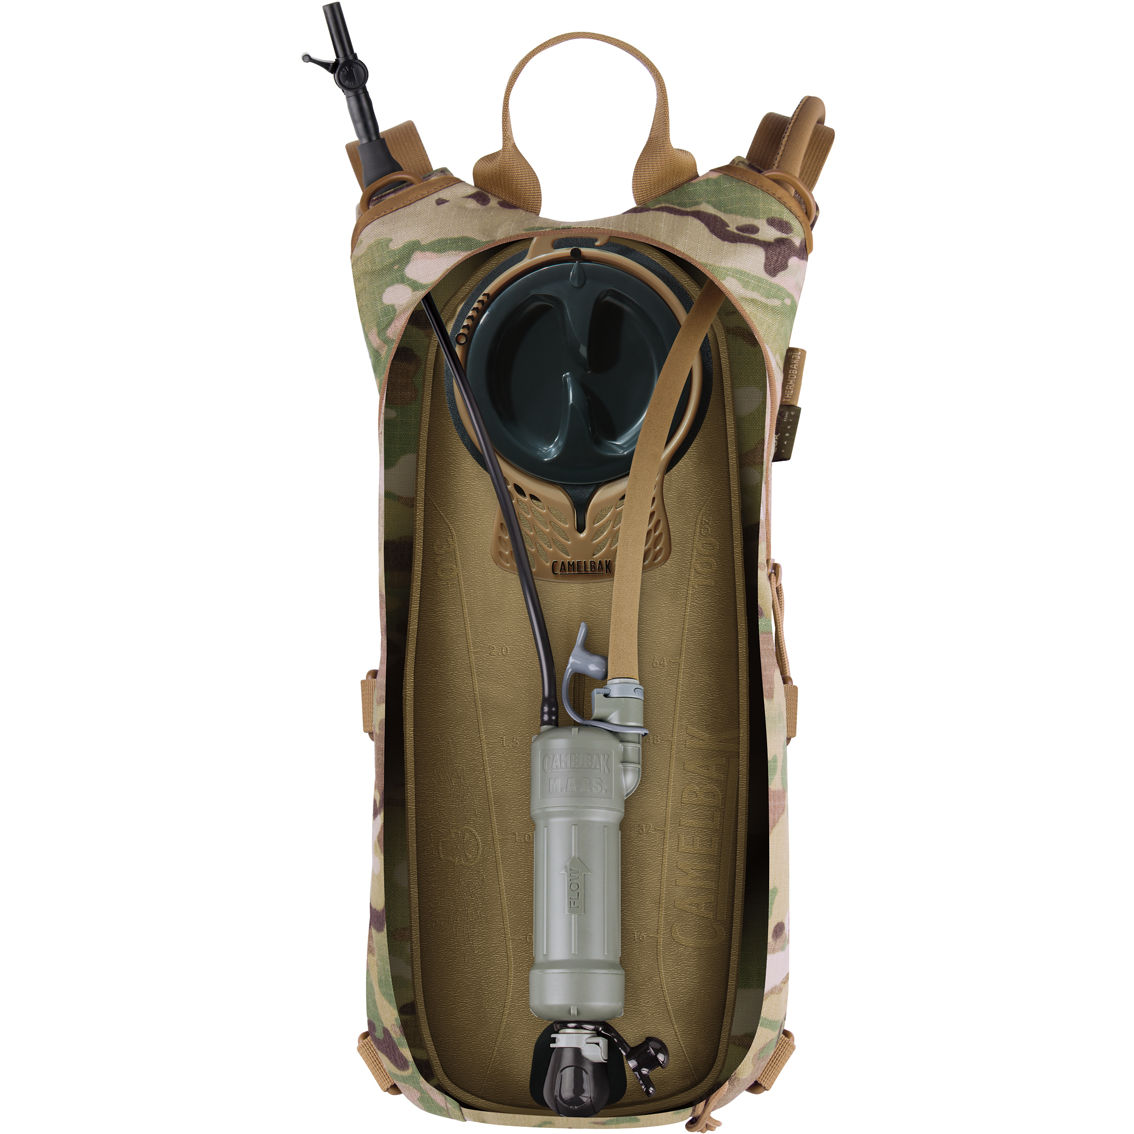 Camelbak M.A.P.S. Purification System - Image 2 of 2